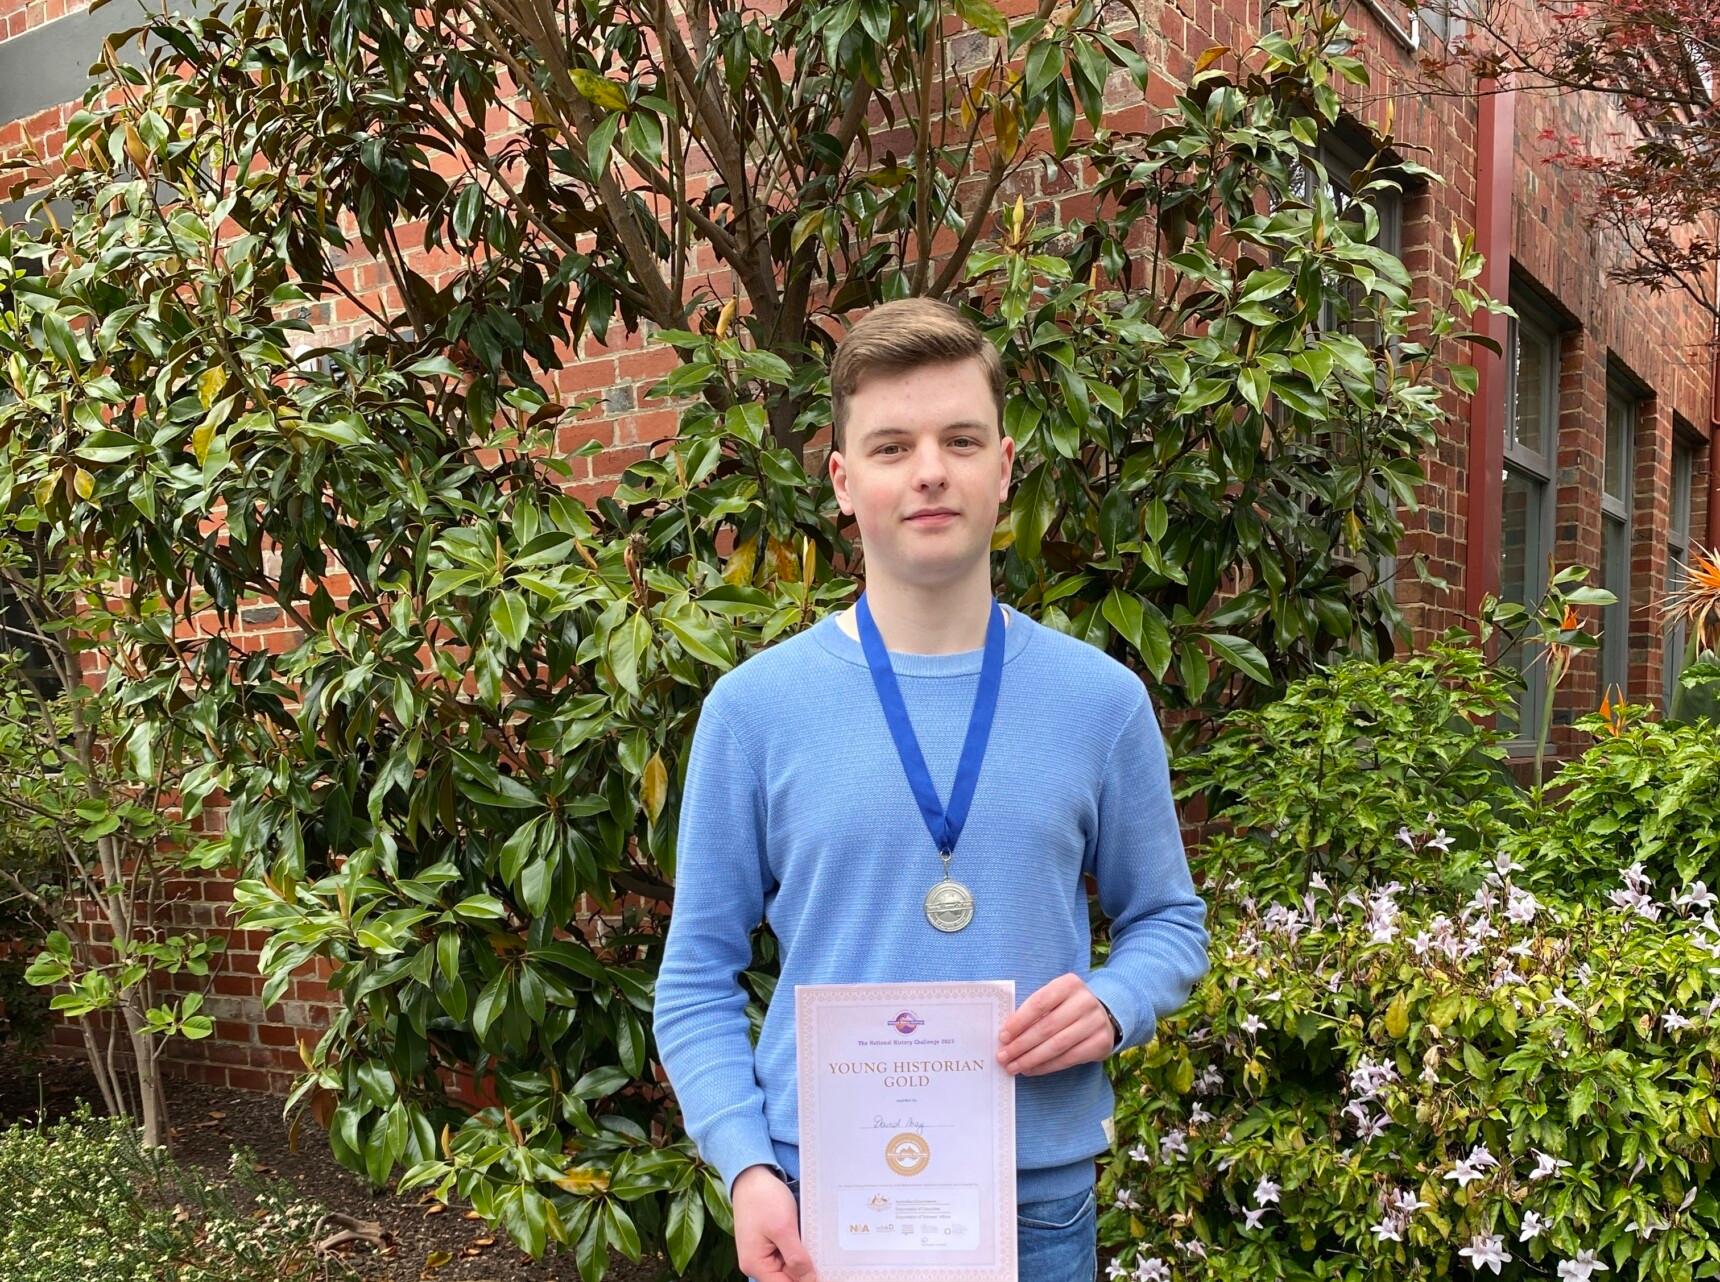 David in Year 12 won first place in Victoria in the Wartime Experiences category of the National History Challenge 2023!